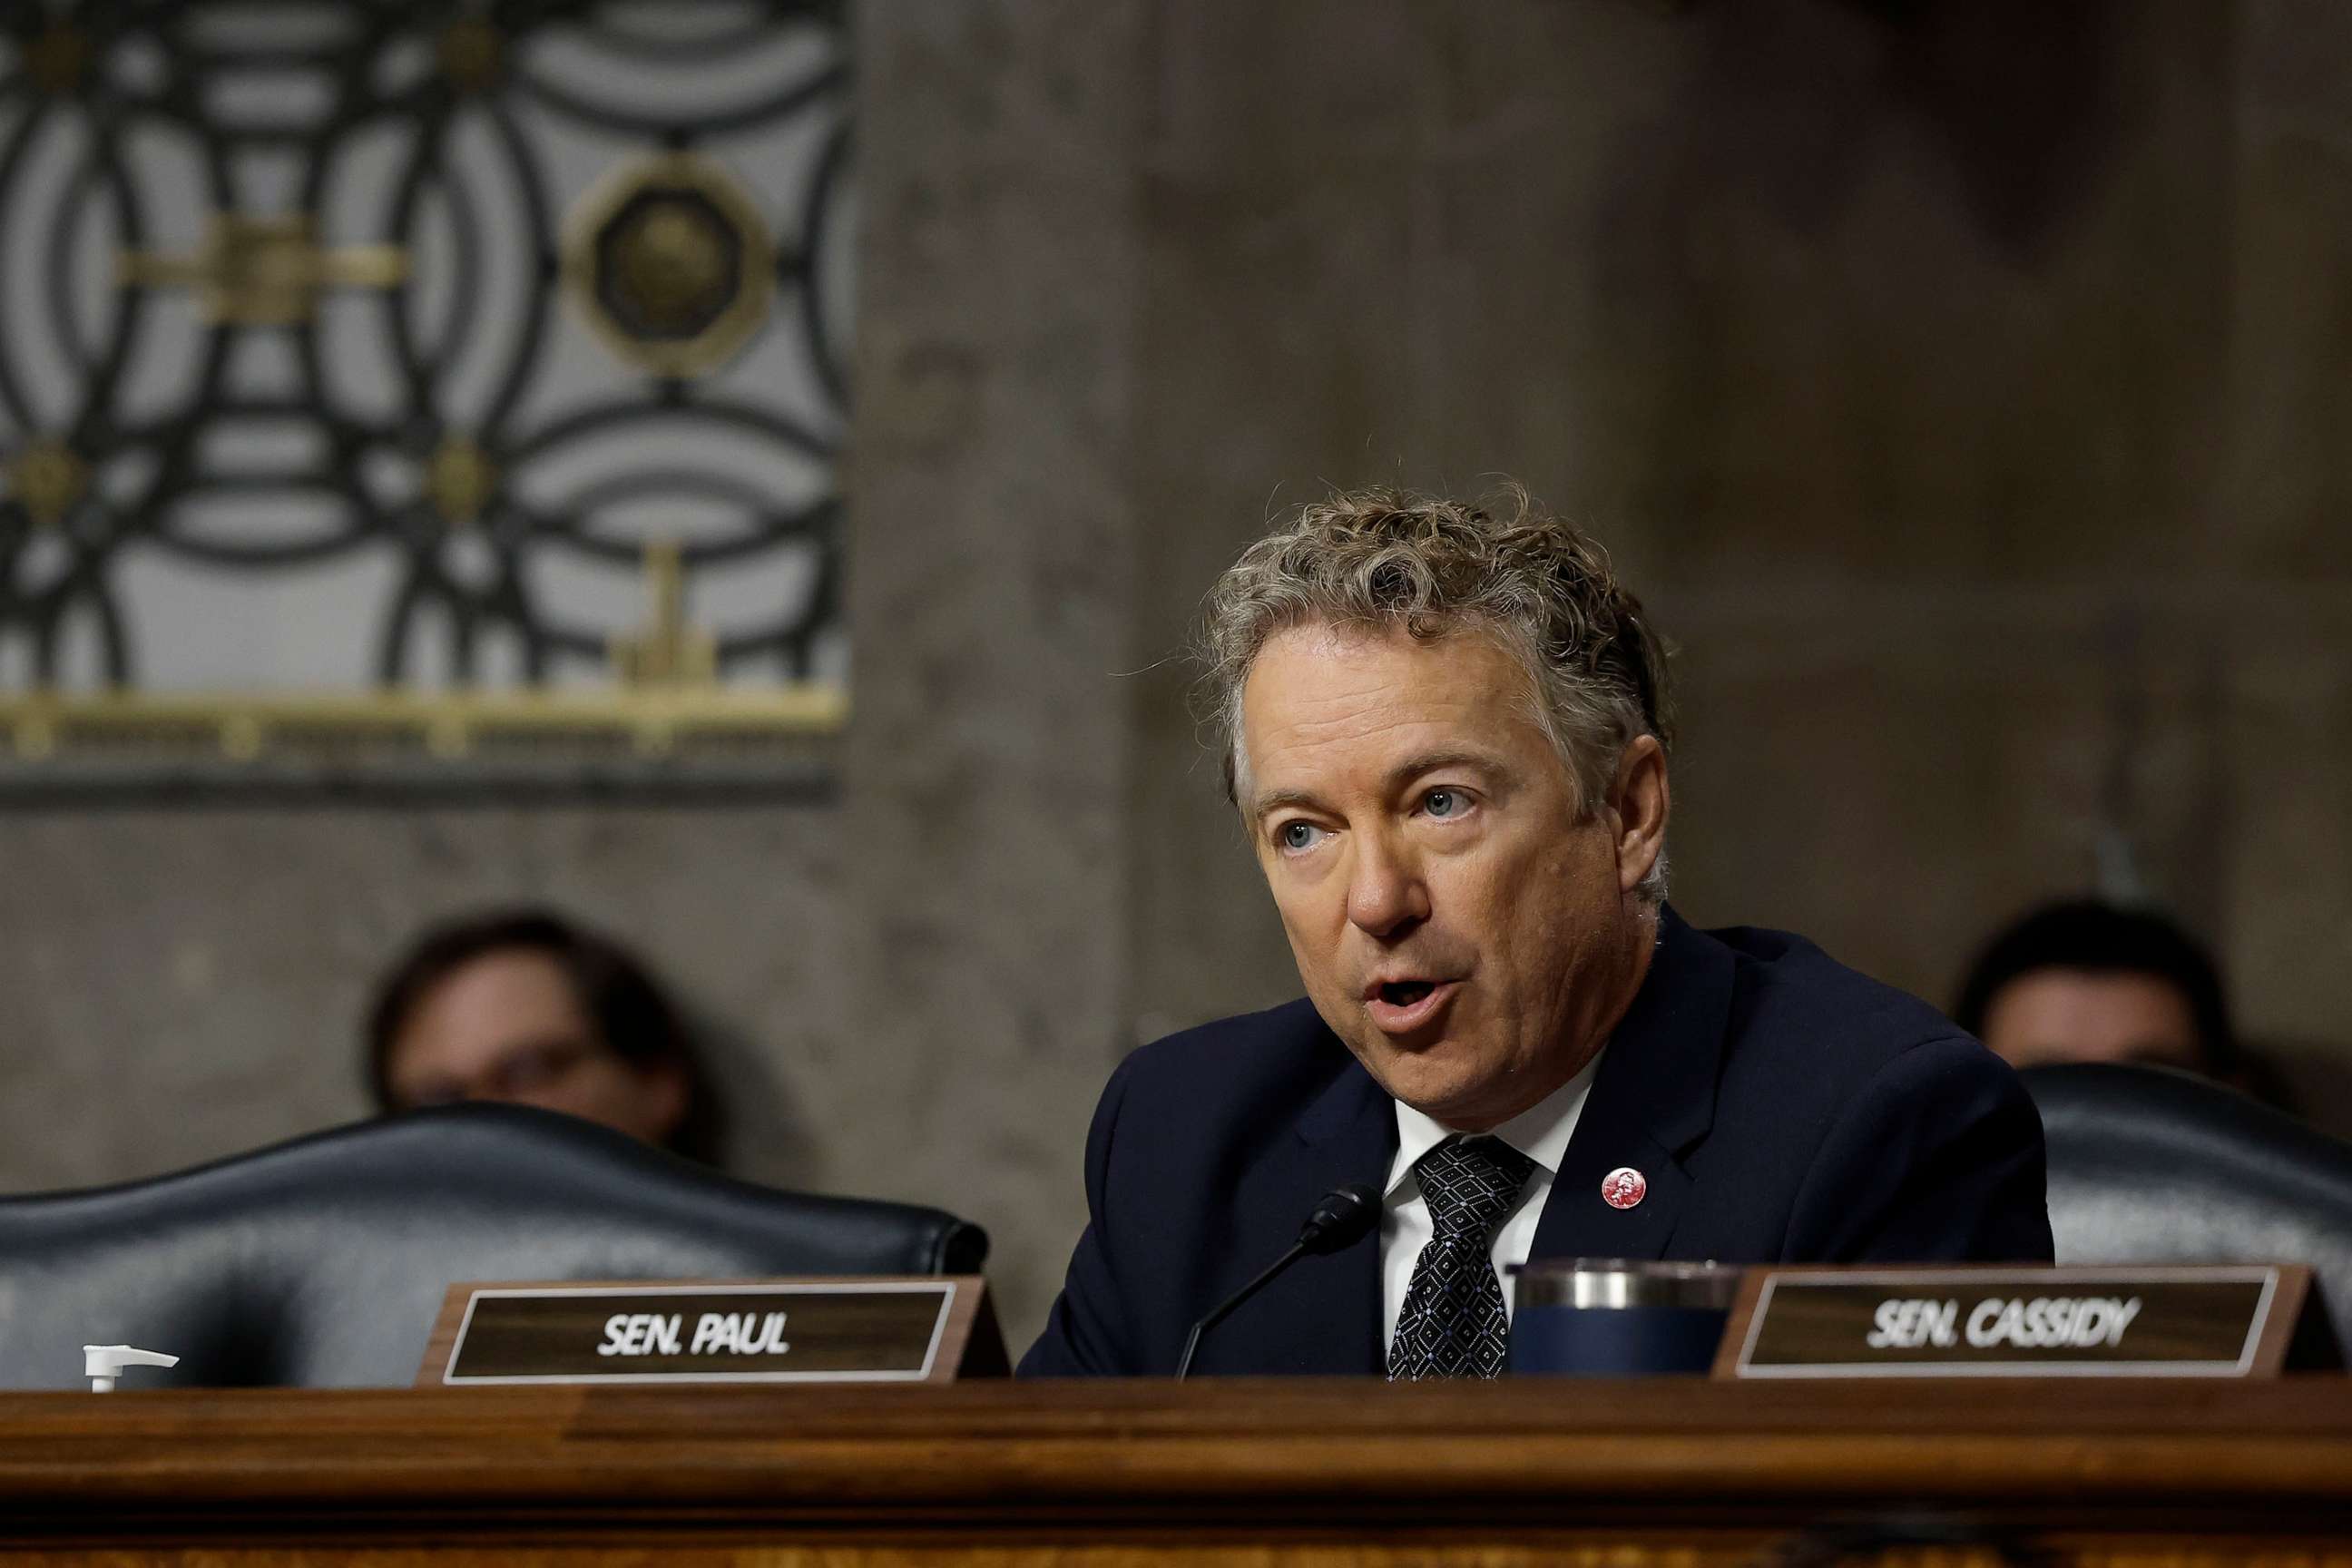 PHOTO: Sen. Rand Paul speaks during a hearing with former Starbucks CEO Howard Schultz in the Dirksen Senate Office Building on Capitol Hill, March 29, 2023.